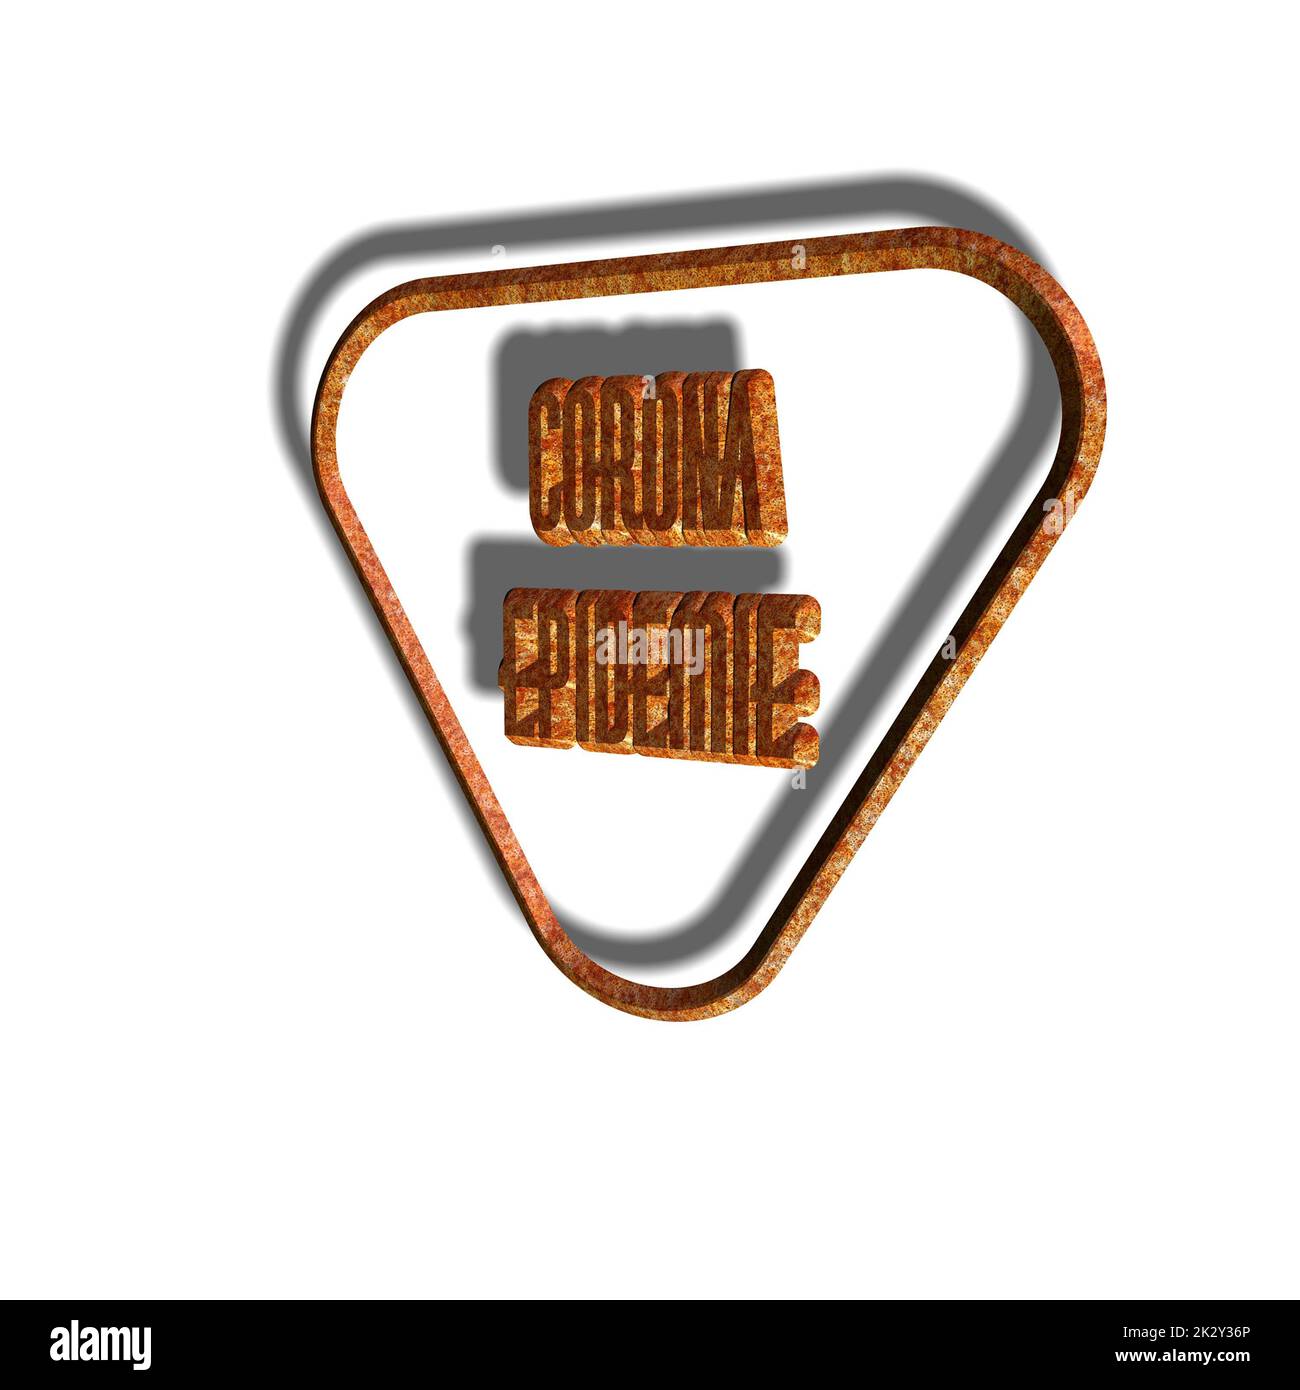 'Coronaepidemie' = 'Corona epidemic' - word, lettering or text as 3D illustration, 3D rendering, computer graphics Stock Photo